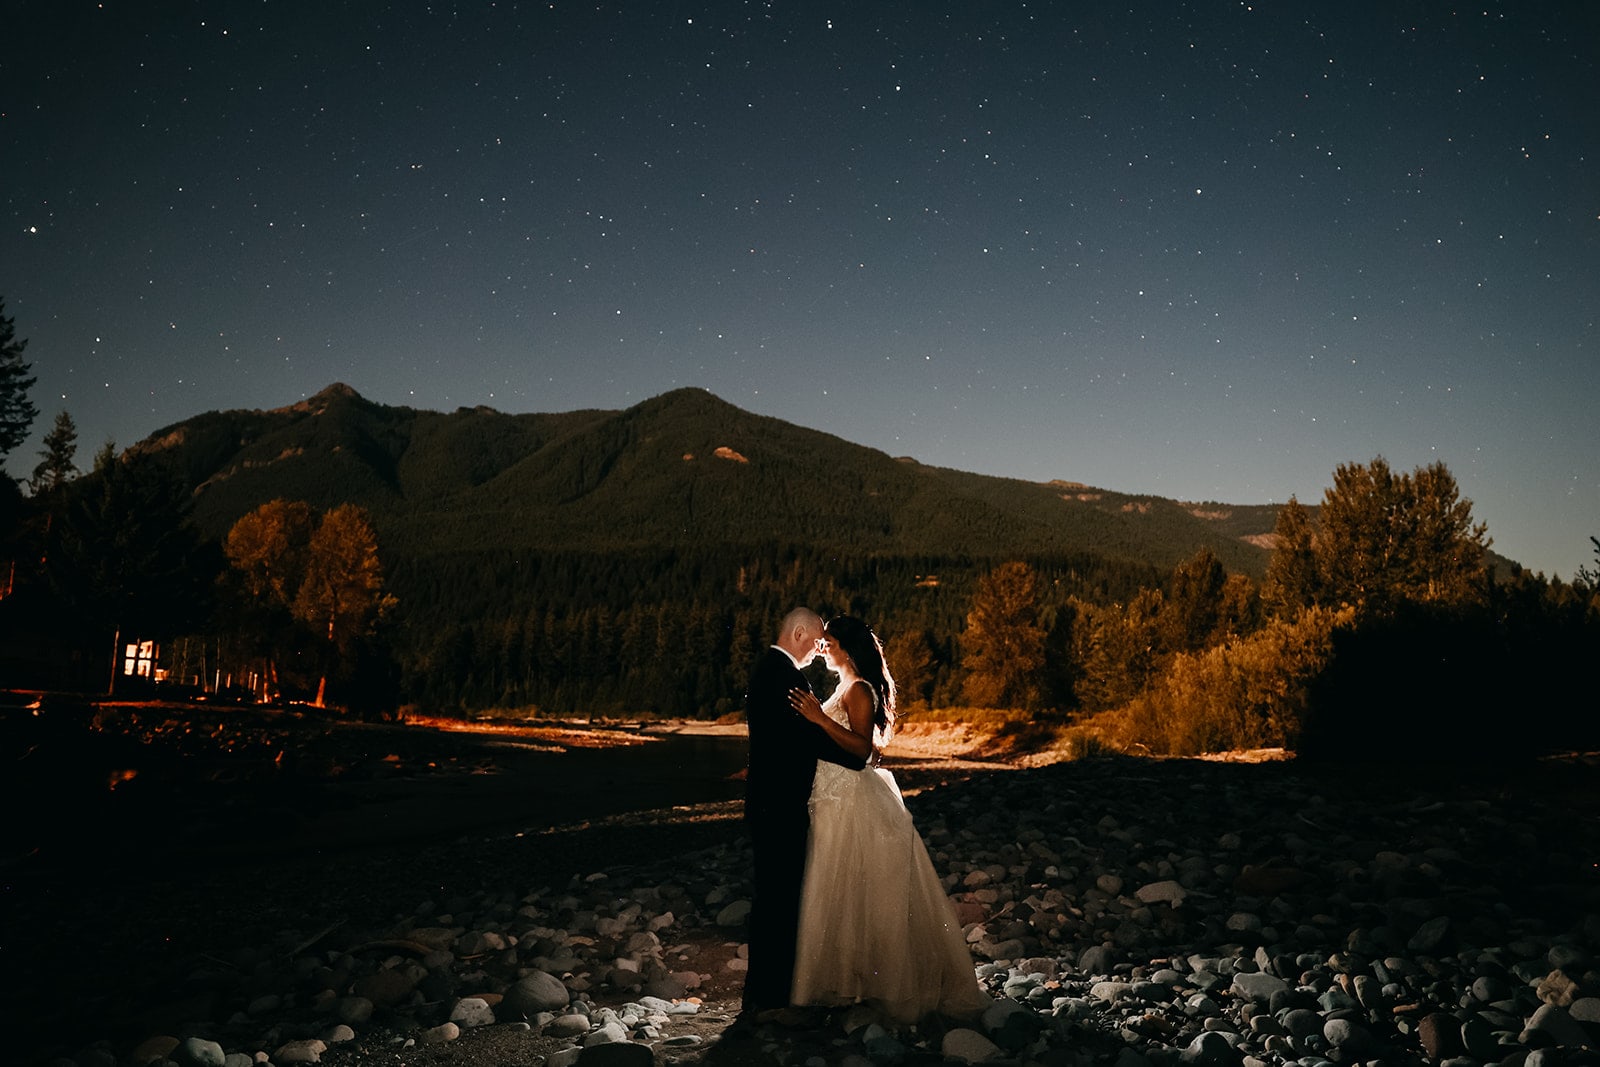 Star photo of the couple surrounded by the mountains in Packwood.